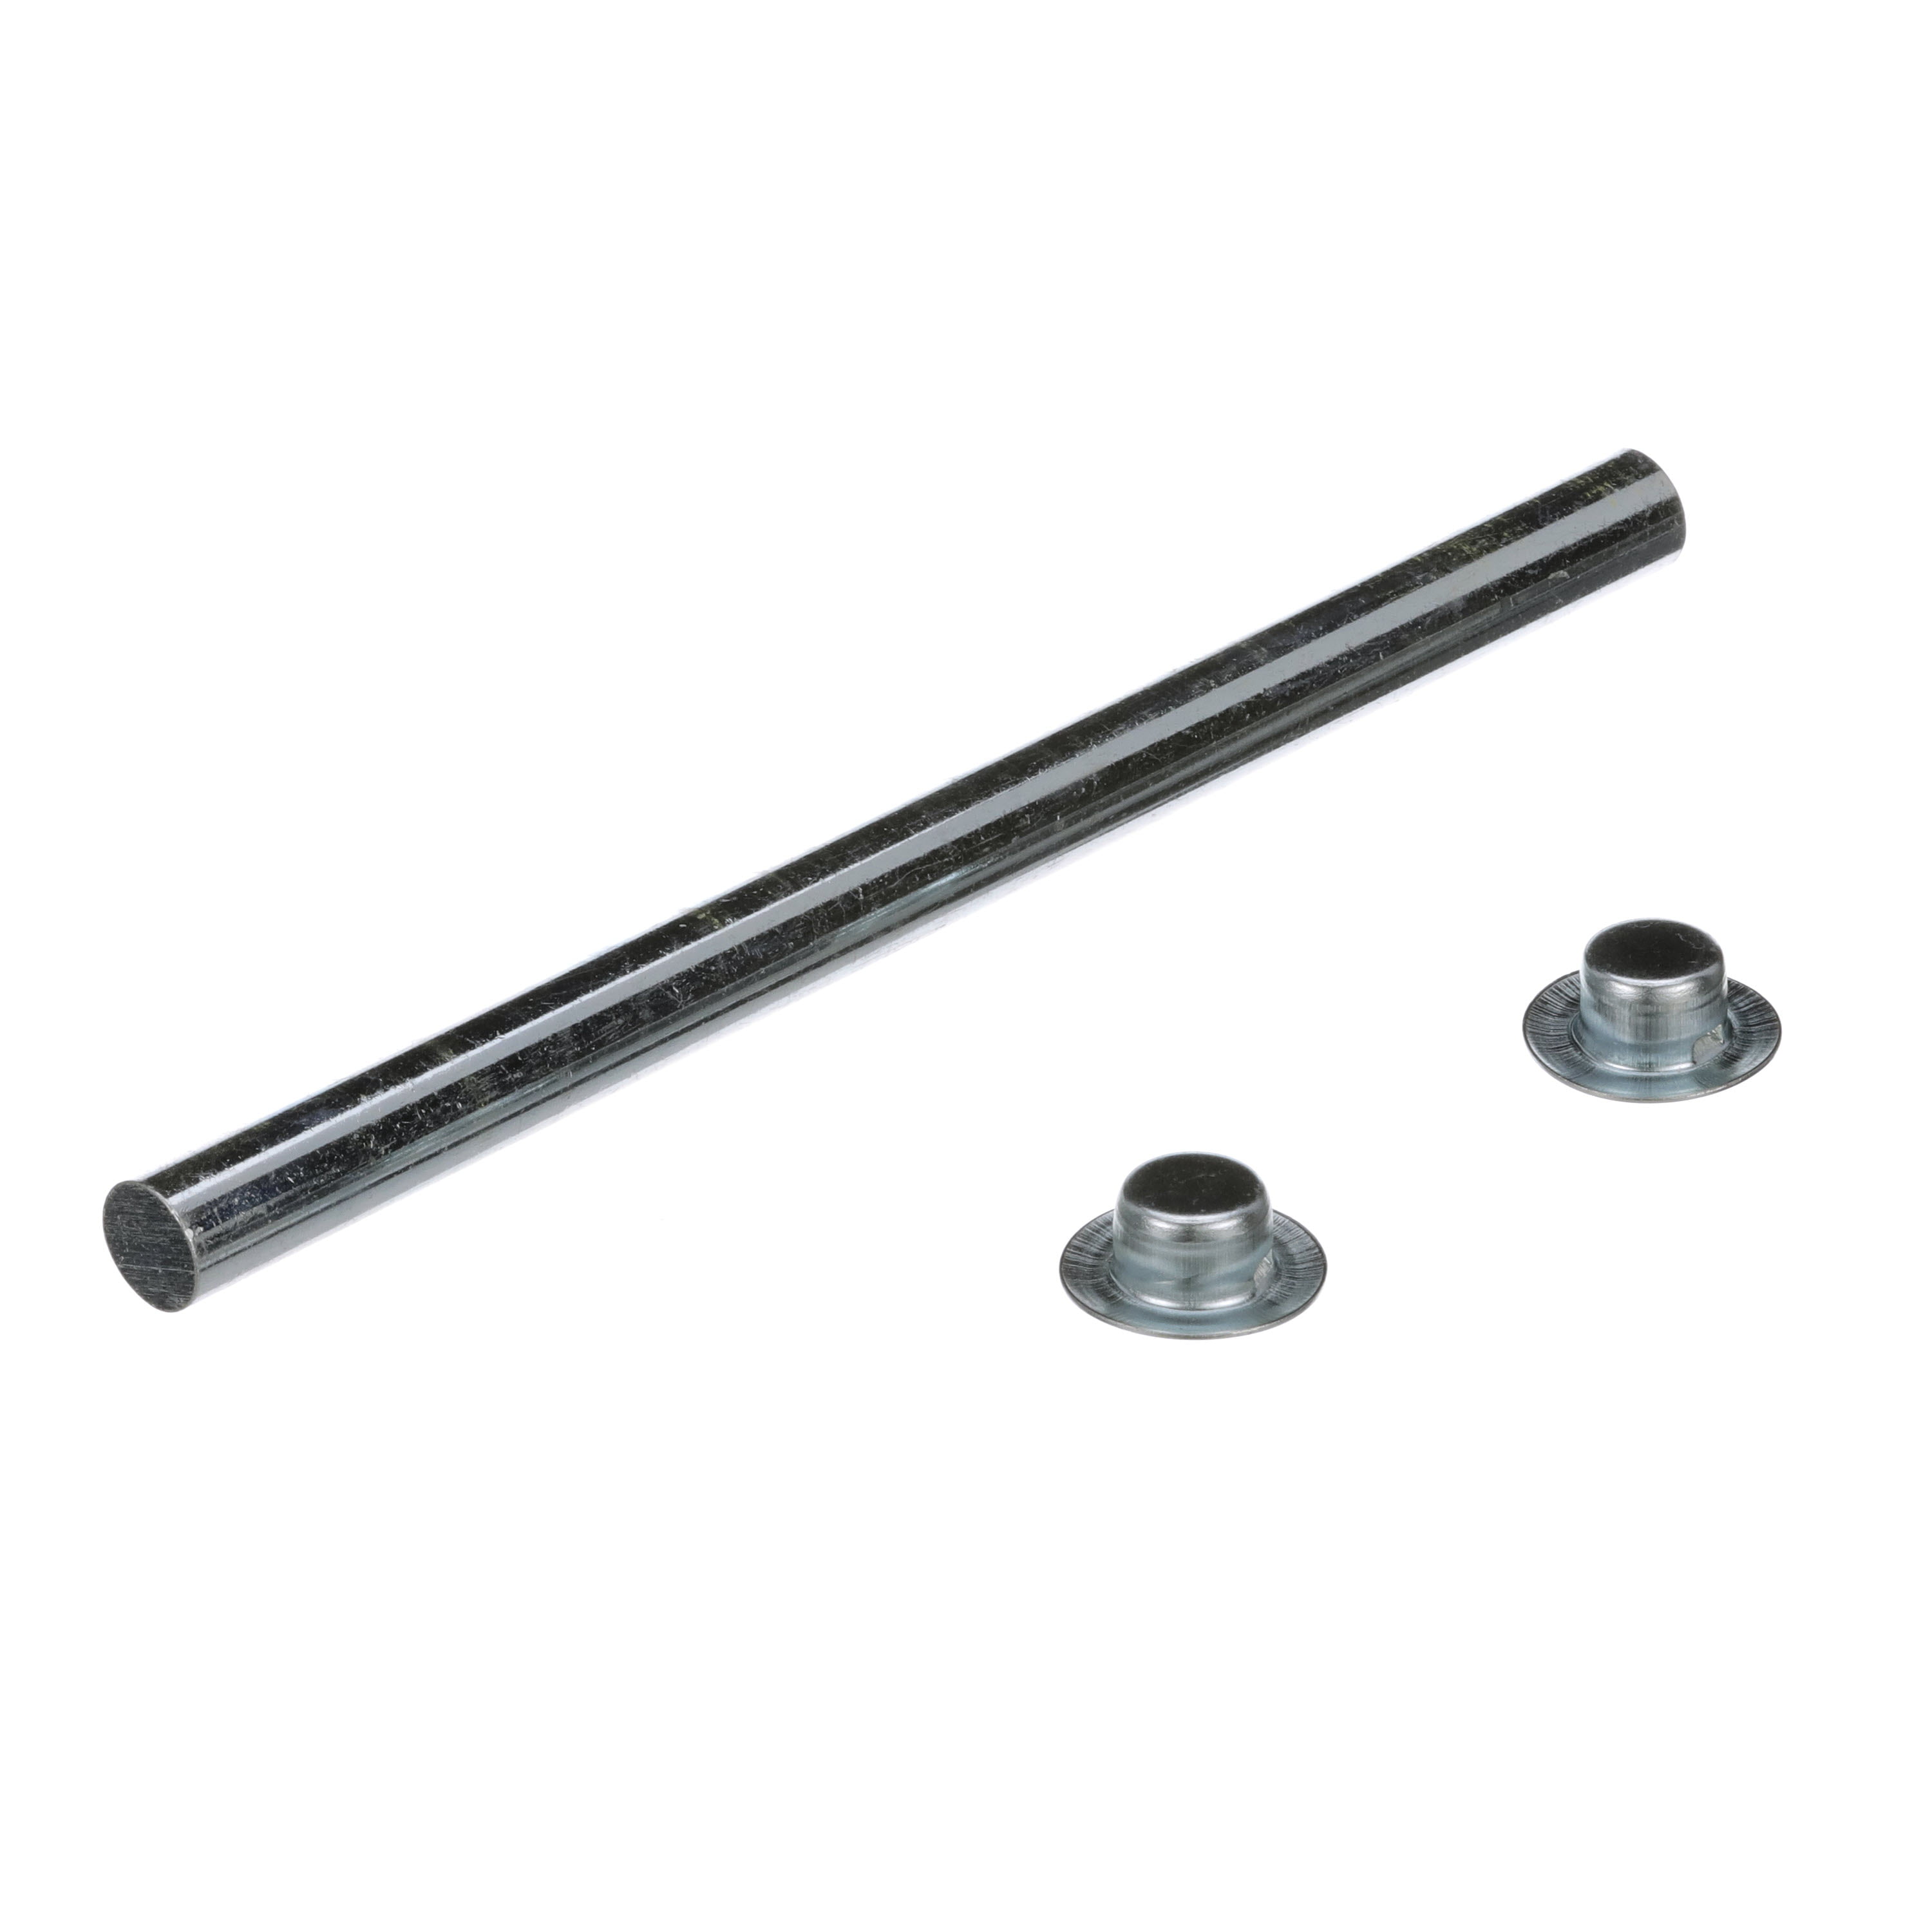 Fits 8 Roller SeaSense Zinc Plated Roller Shafts With Pal Nuts 5/8 x 9 1/4 